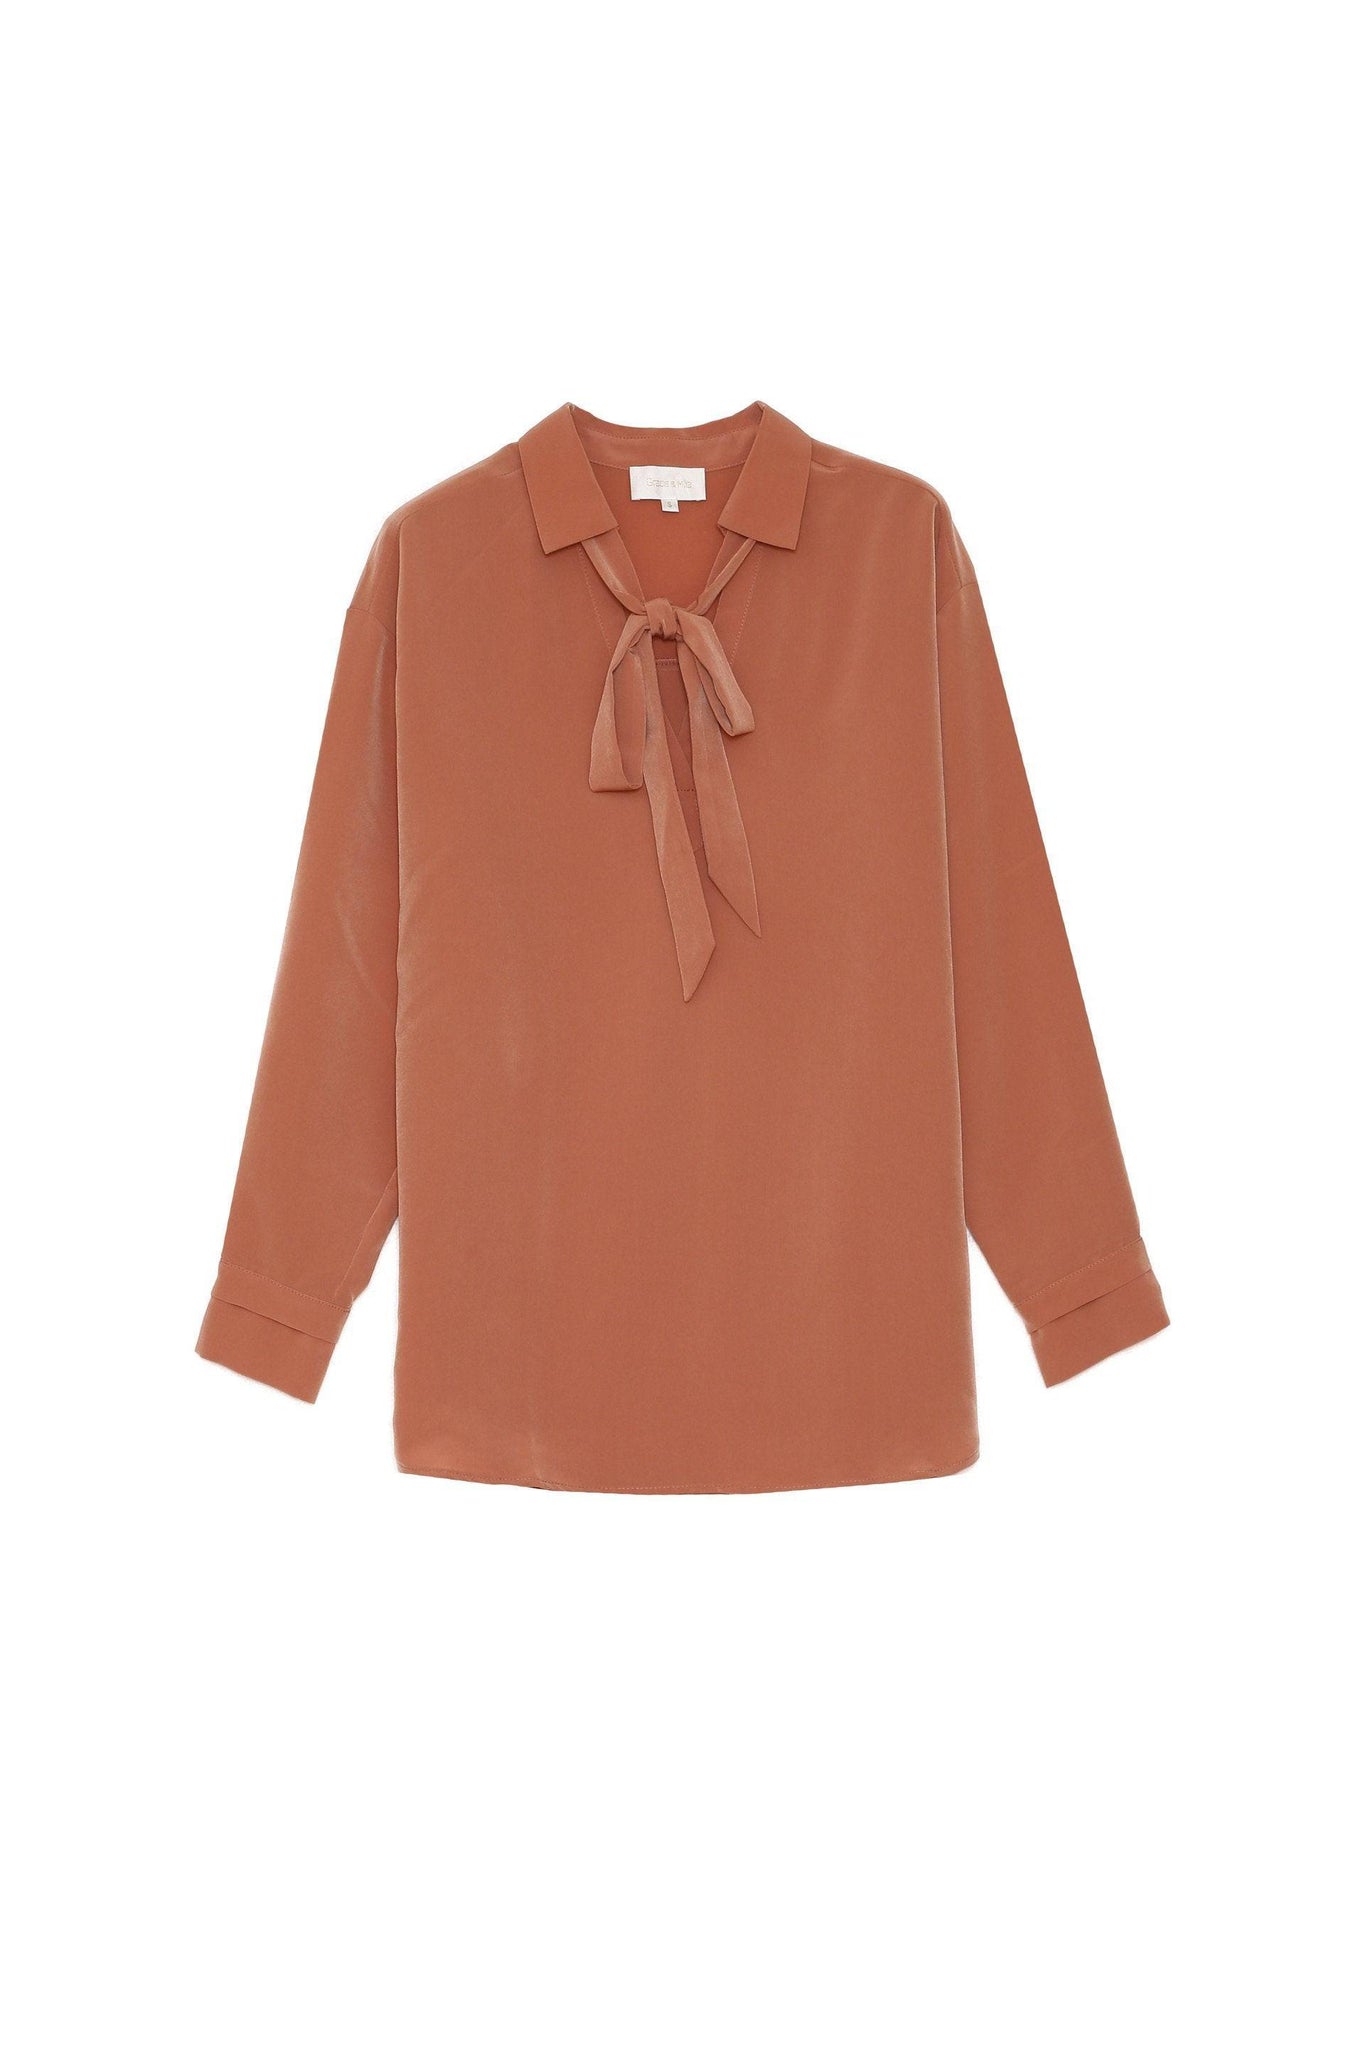 Grace & Mila Long-sleeved Rose Blouse with a lavaliere collar - Your Style Your Story